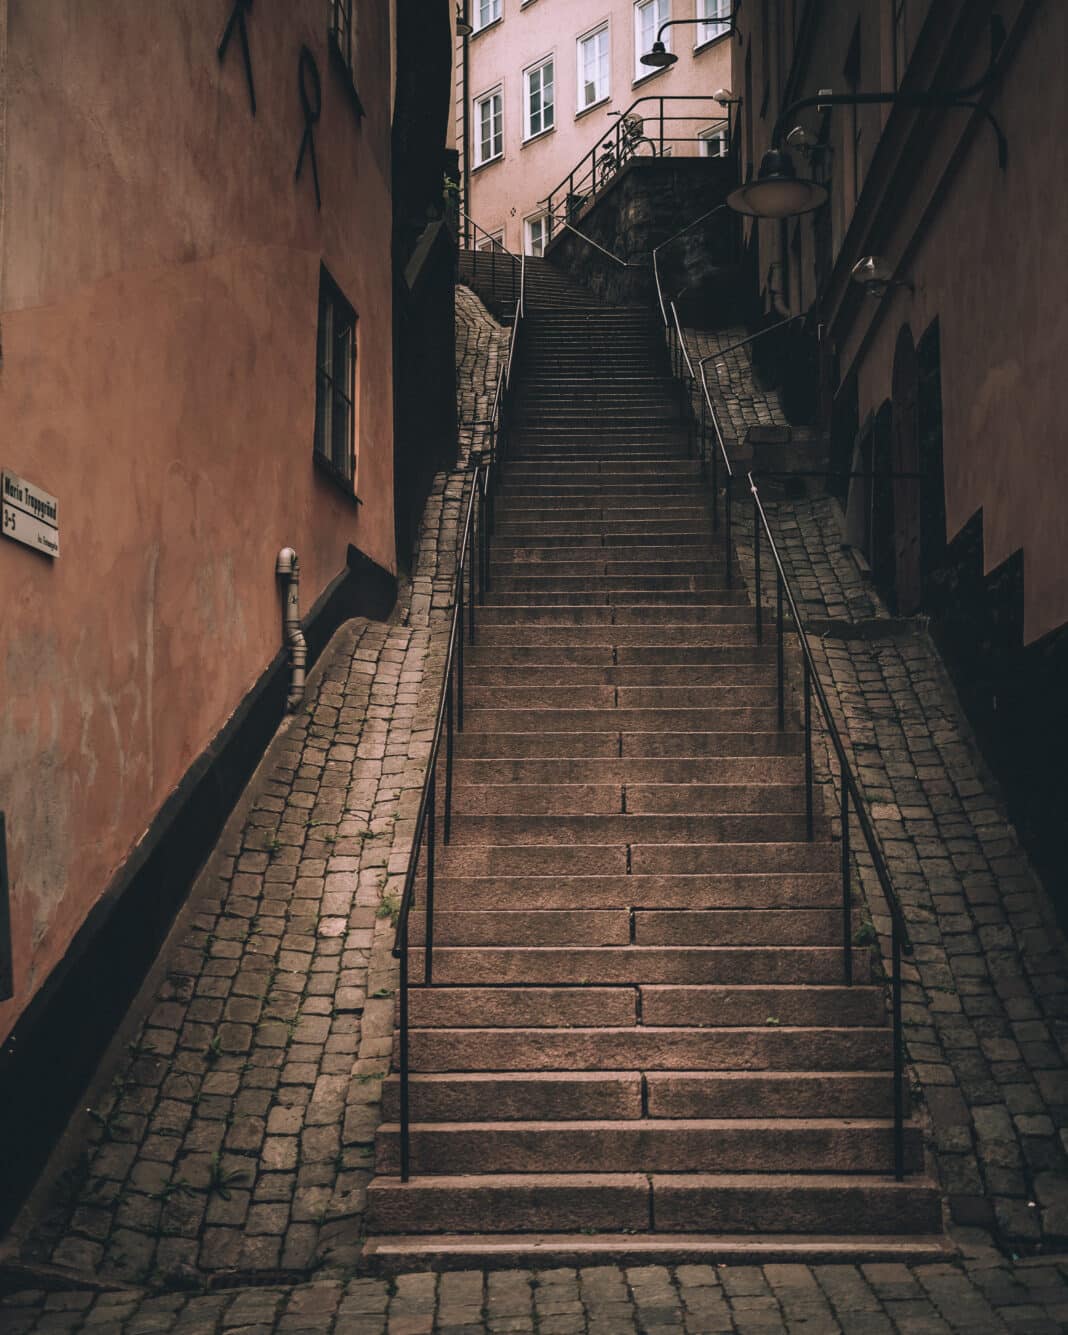 Stairs in Stockholm - Stairs in Stockholm